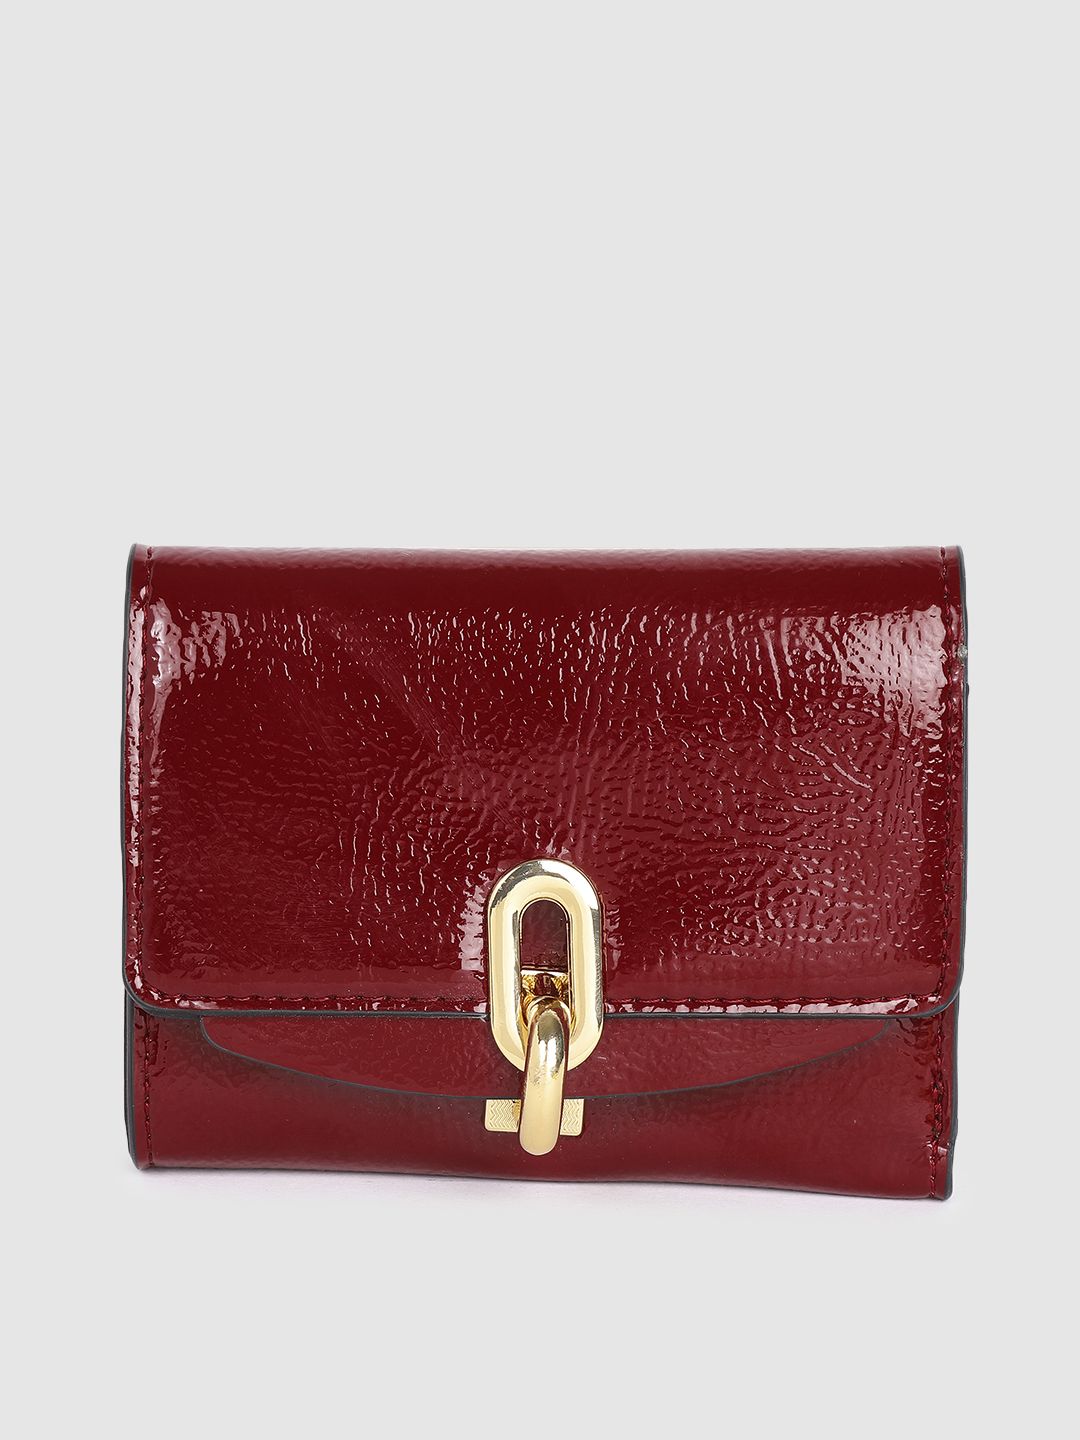 Accessorize Women Burgundy Two Fold Patent lock closure Wallet Price in India